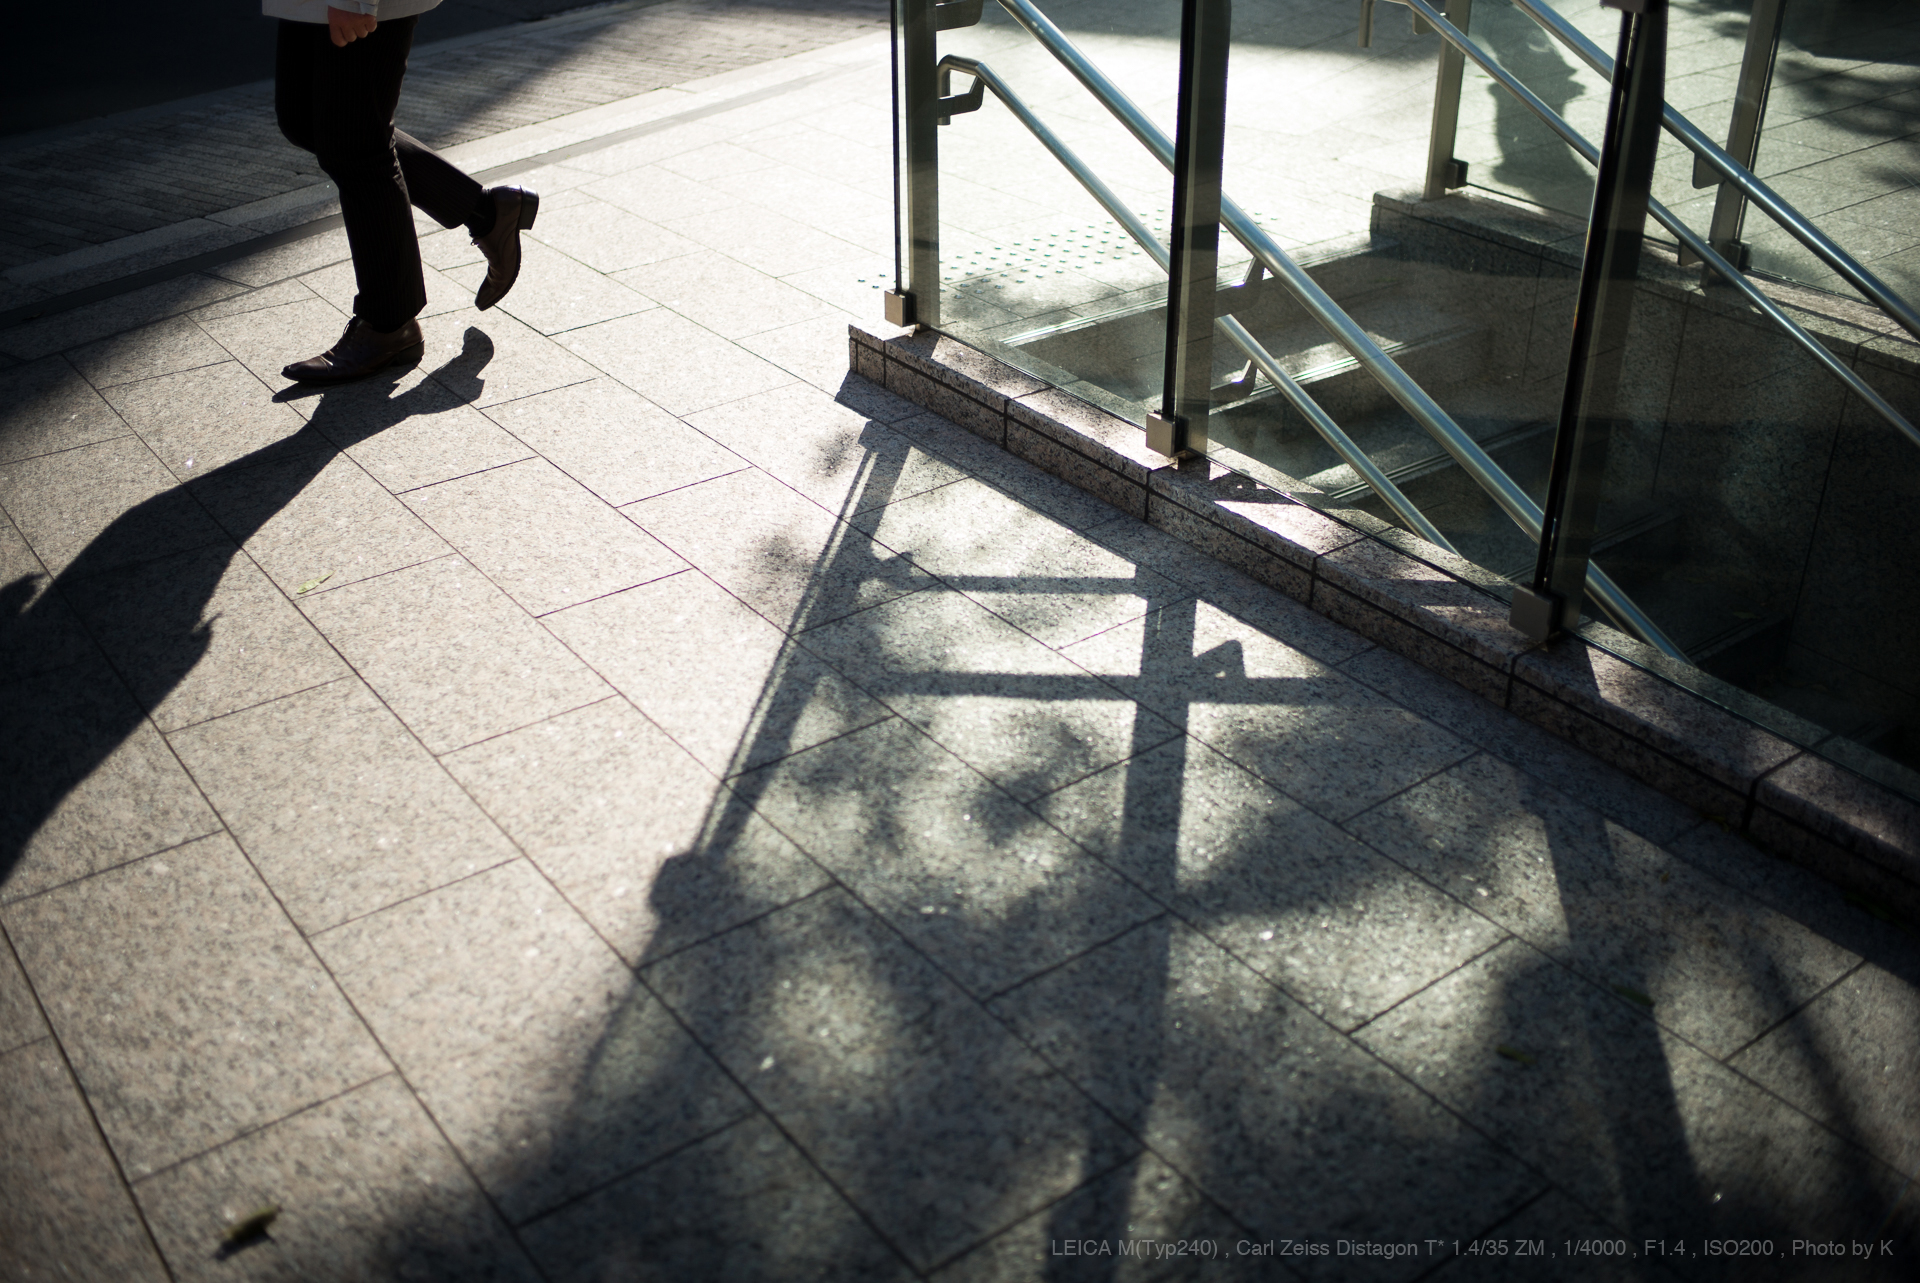 LEICA M (Typ240), Carl Zeiss Distagon T* 1.4/35 ZM, 1/4000, F1.4, ISO 200, Photo by K